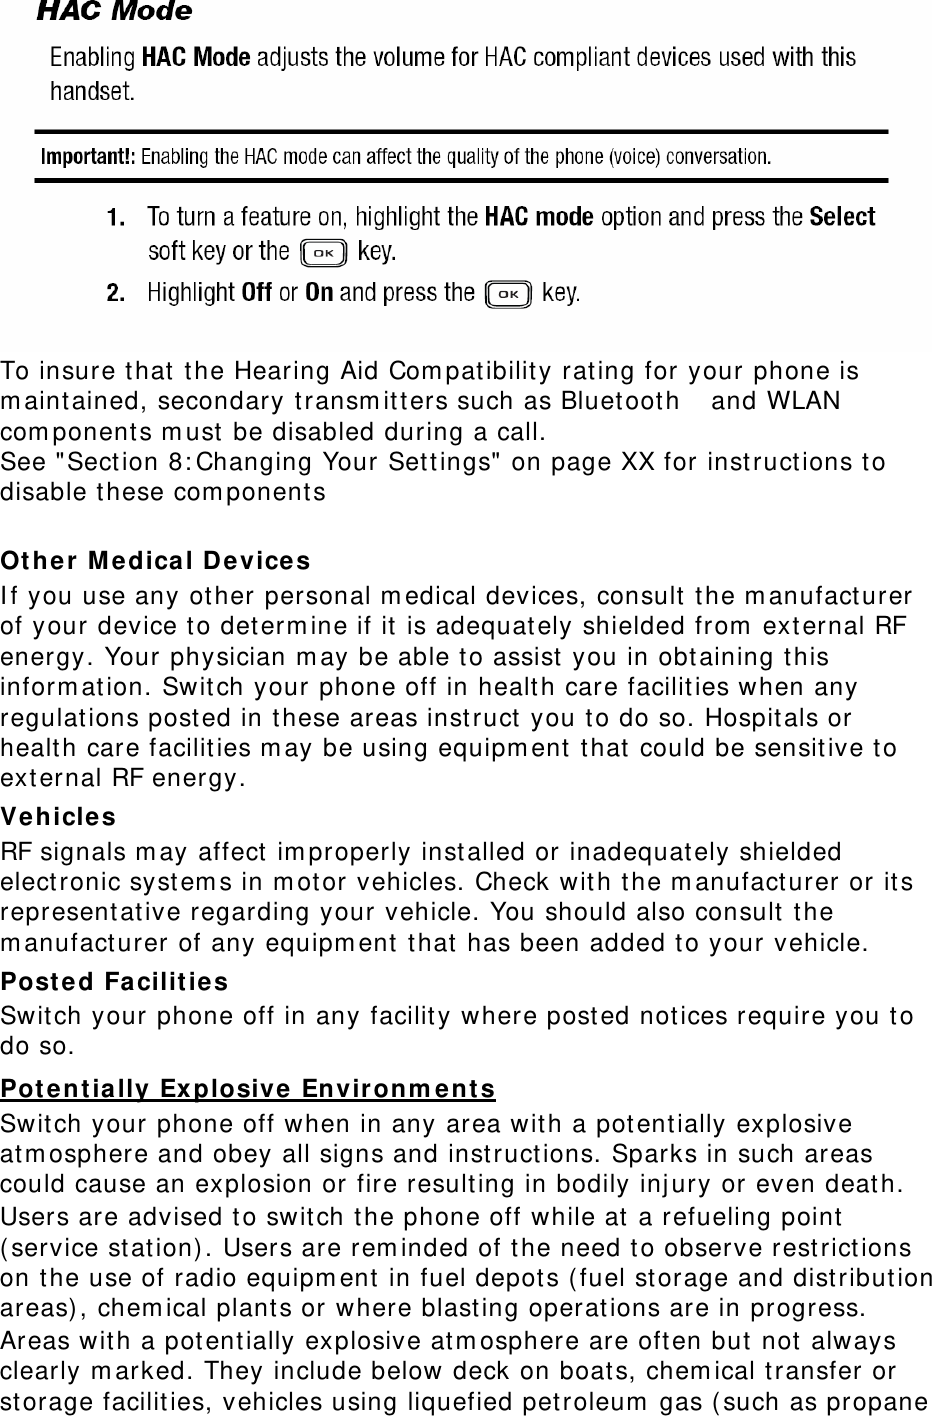  To insure t hat t he Hearing Aid Com patibilit y rating for your phone is m aintained, secondary t ransm itt ers such as Bluetooth    and WLAN com ponents m ust  be disabled during a call.   See &quot; Section 8: Changing Your Settings&quot; on page XX for inst ructions to disable t hese com ponent s    Ot her  M e dica l Devices I f you use any other personal m edical devices, consult  t he m anufact urer of your device to det erm ine if it is adequat ely shielded from  ext ernal RF energy. Your physician m ay be able to assist  you in obtaining t his inform ation. Switch your phone off in health care facilit ies when any regulat ions posted in t hese areas inst ruct you to do so. Hospit als or health care facilit ies m ay be using equipm ent t hat  could be sensit ive to ext ernal RF energy. Vehicle s RF signals m ay affect  im properly installed or inadequat ely shielded elect ronic system s in m otor vehicles. Check with t he m anufact urer or its represent ative regarding your vehicle. You should also consult  t he m anufact urer of any equipm ent  t hat has been added t o your vehicle. Posted Facilit ies Switch your phone off in any facilit y where post ed notices require you t o do so. Pot ent ia lly Explosive  Envir on m ent s Switch your phone off when in any area wit h a potent ially explosive at m osphere and obey all signs and inst ructions. Sparks in such areas could cause an explosion or fire result ing in bodily inj ury or even death. Users are advised t o switch t he phone off while at a refueling point  ( service station) . Users are rem inded of t he need to observe rest rict ions on t he use of radio equipm ent  in fuel depot s ( fuel st orage and distribut ion areas) , chem ical plants or where blasting operat ions are in progress. Areas with a potentially explosive at m osphere are often but  not always clearly m arked. They include below deck on boats, chem ical transfer or storage facilit ies, vehicles using liquefied petroleum  gas ( such as propane 